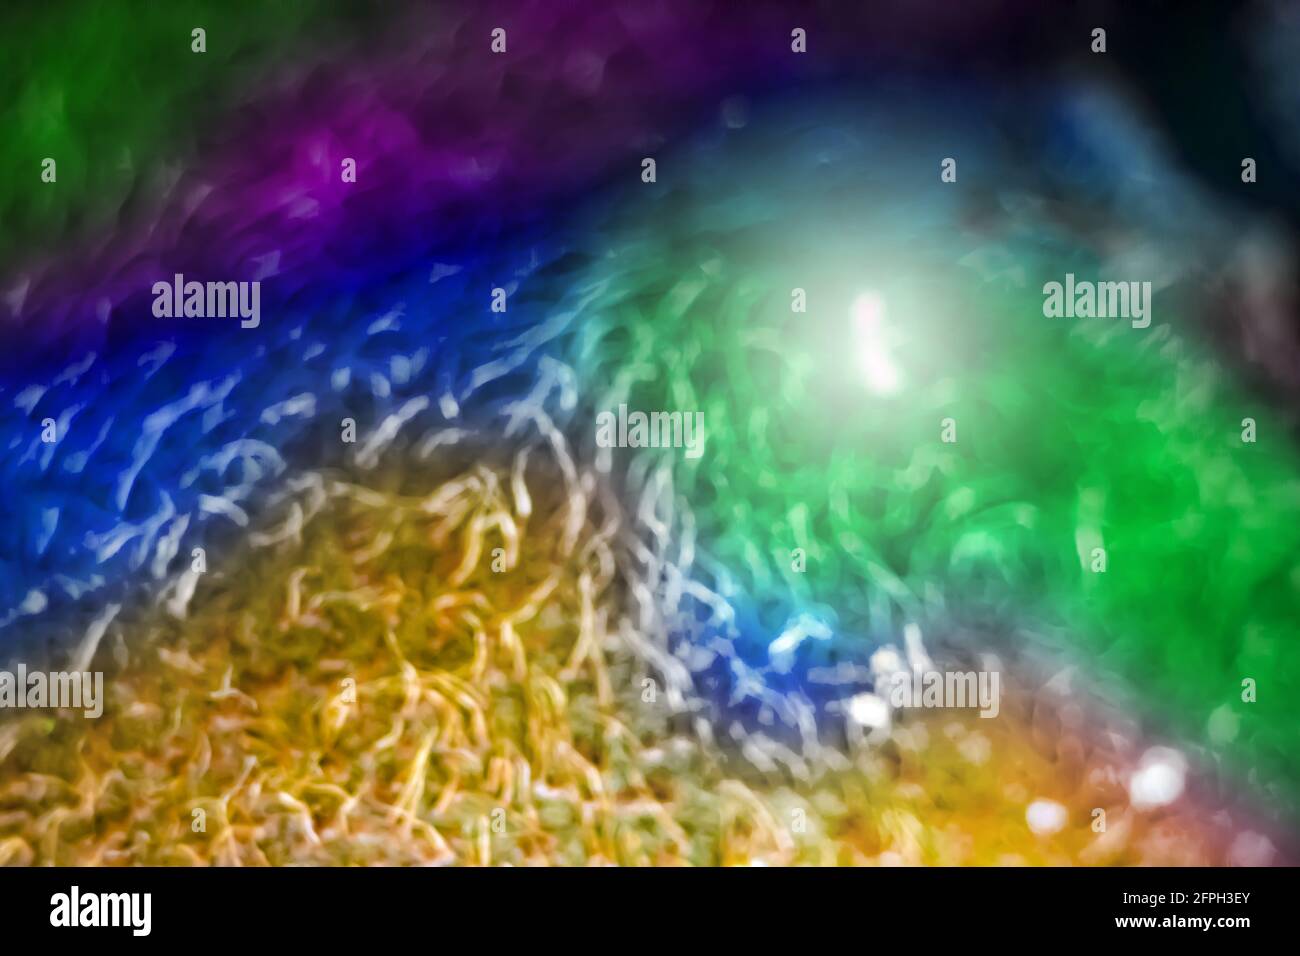 Blurred Abstract Stream of Vivid Colors Background.Golden Beginning and White Shining Exit Stock Photo